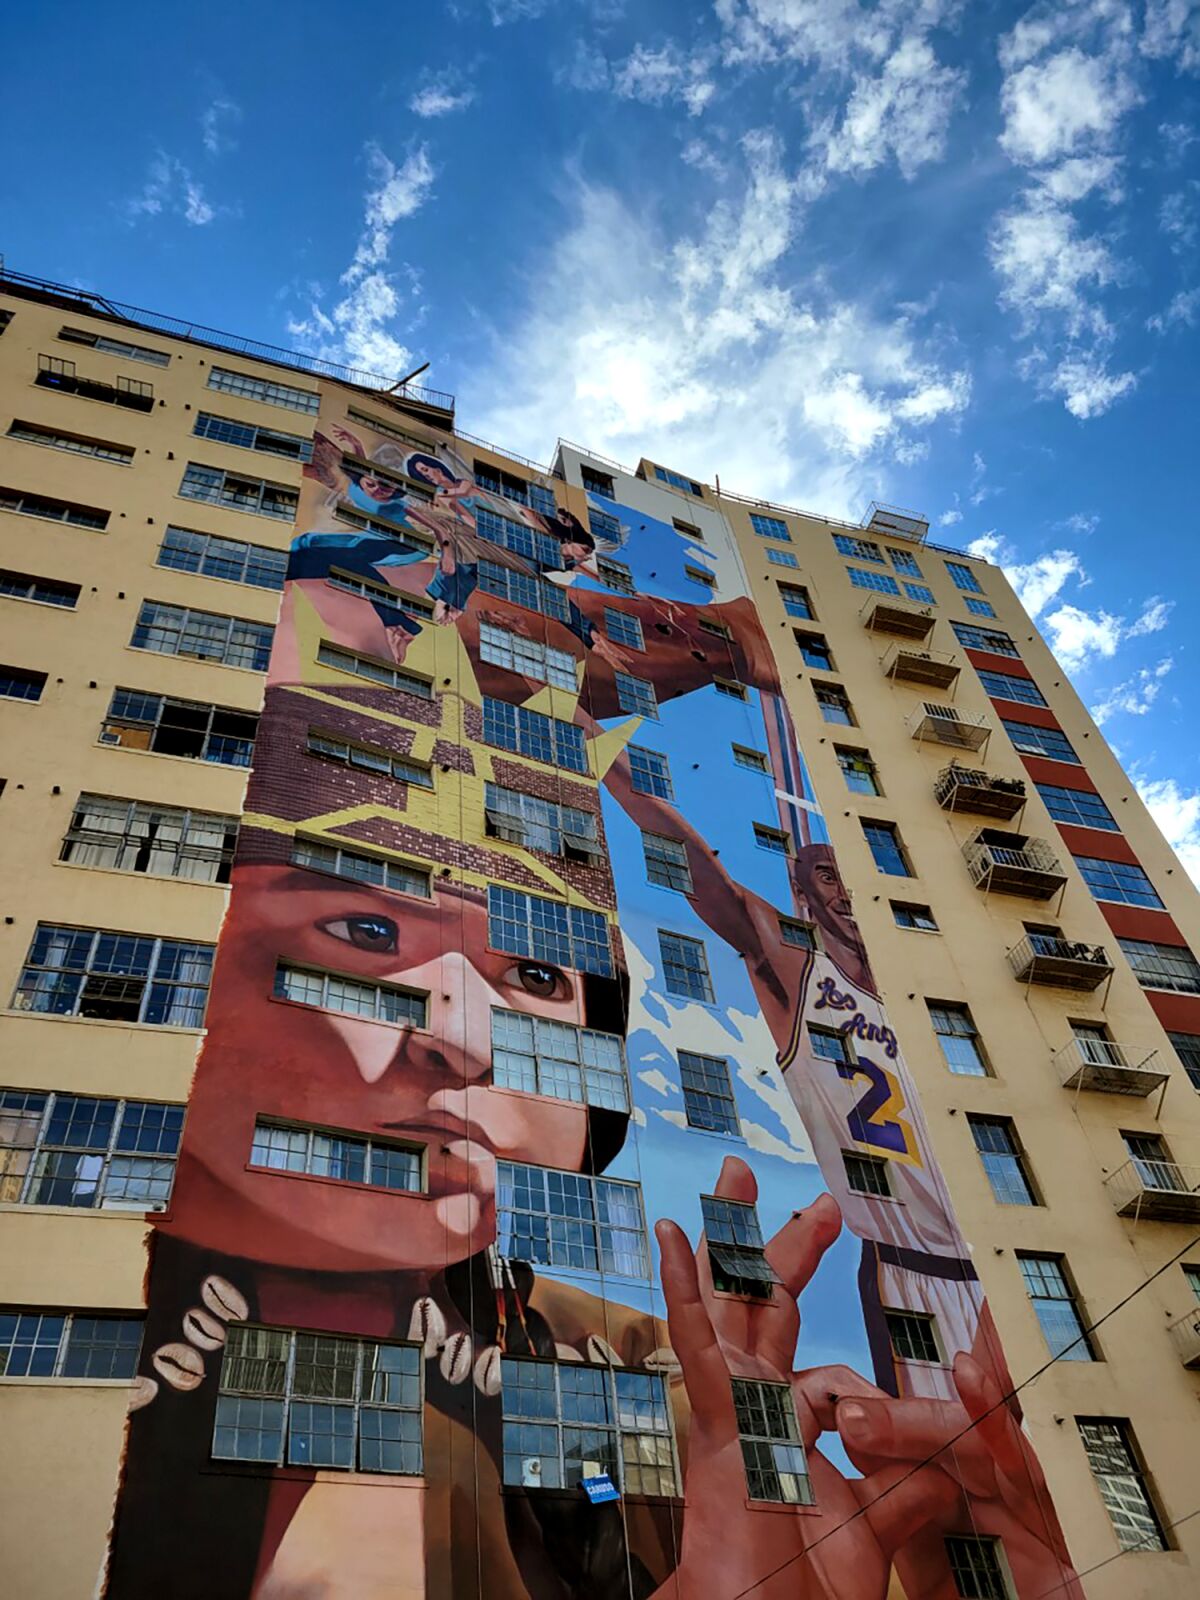 A portion of a mural painted on a tall building.